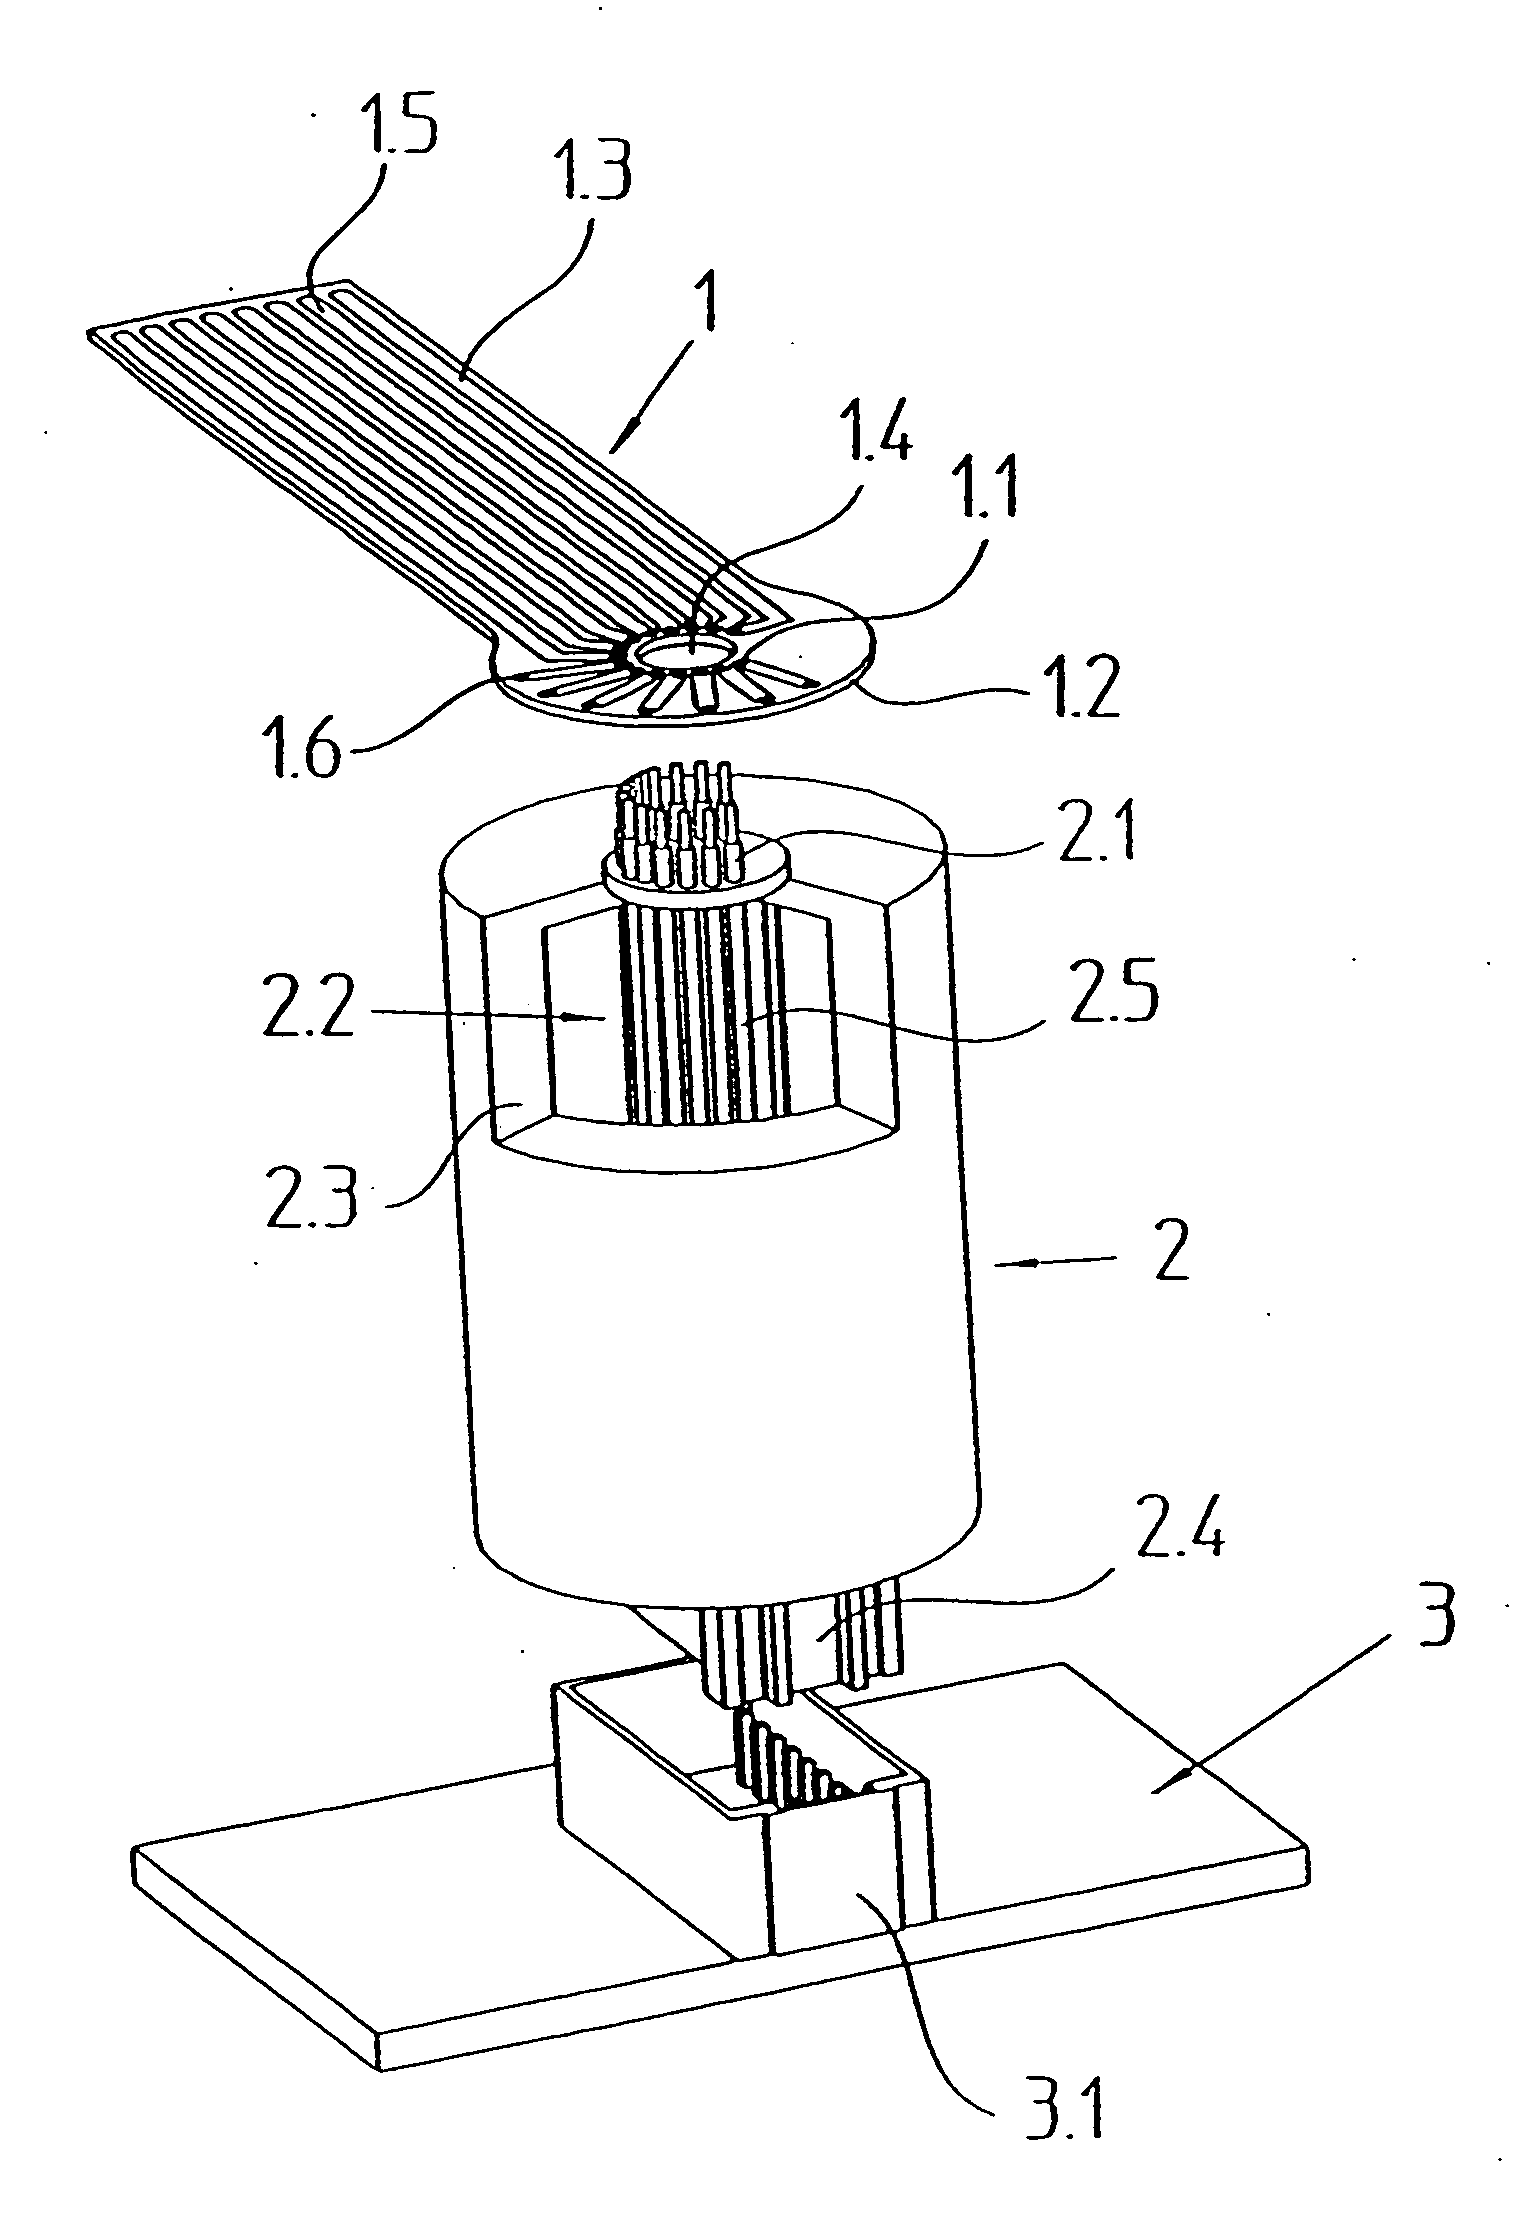 Slip ring unit with a printed circuit board